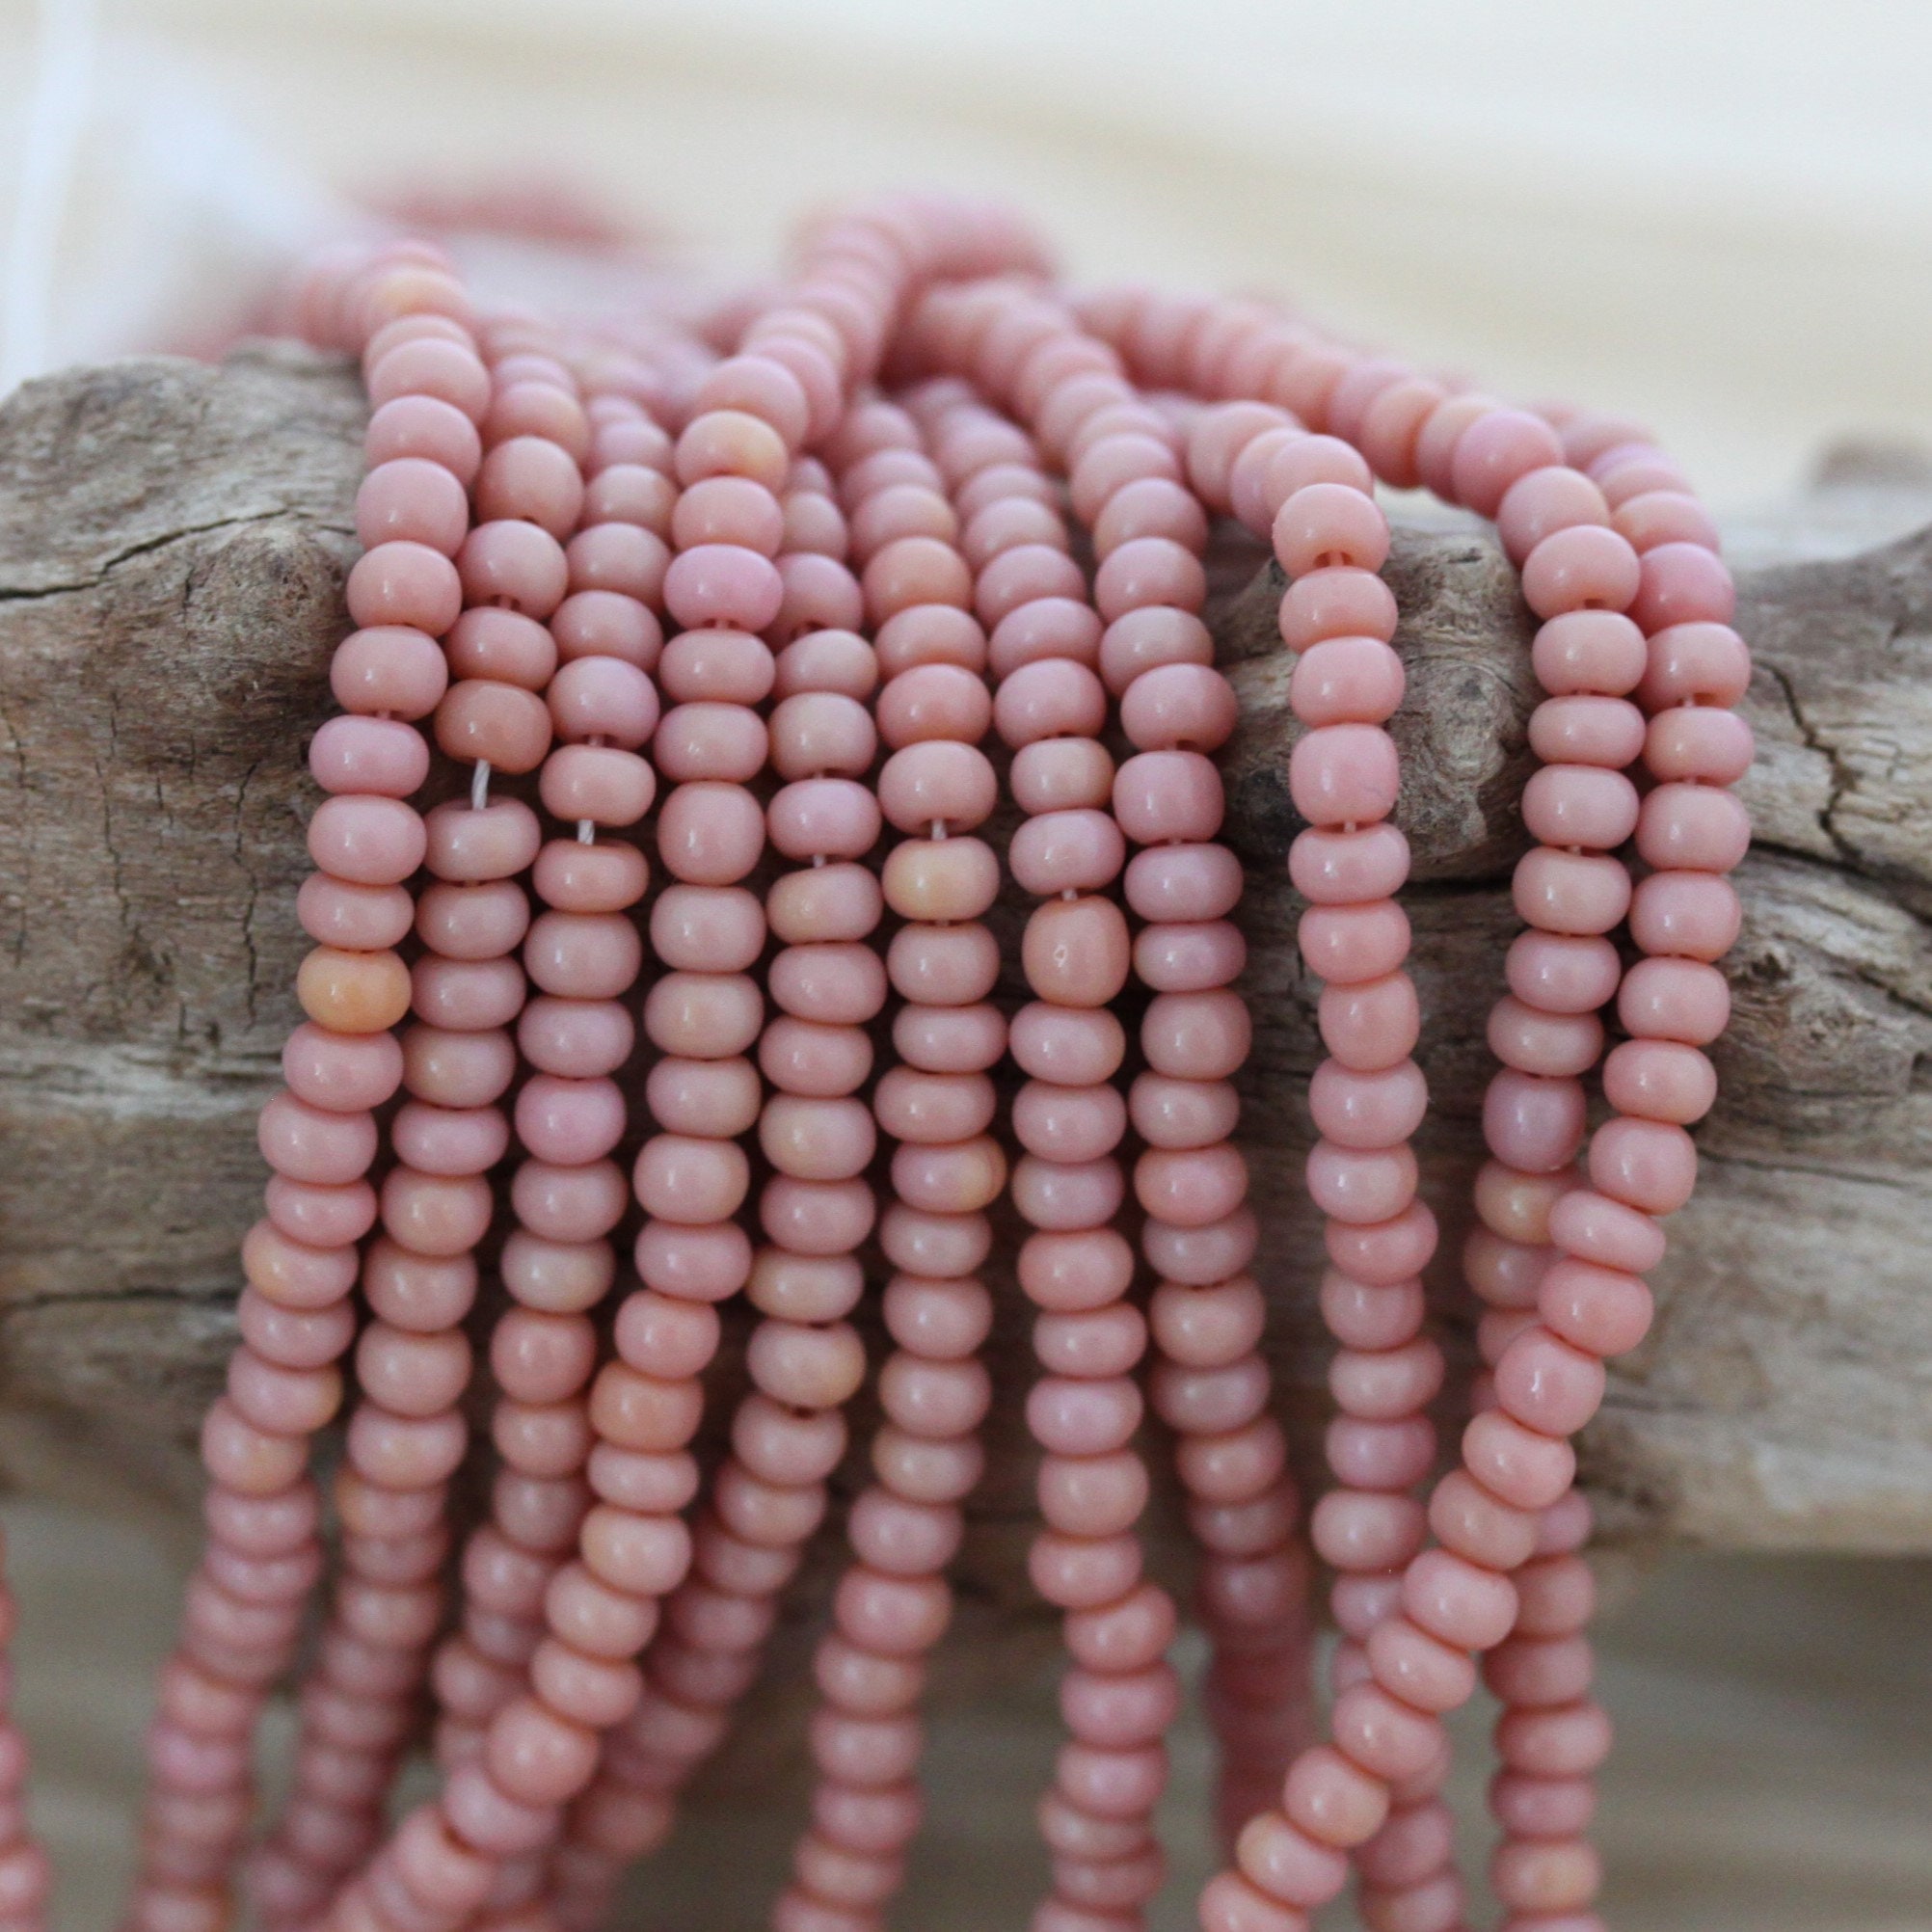 90's Vintage Czech Glass Seed Beads Collection in Shades of Pink